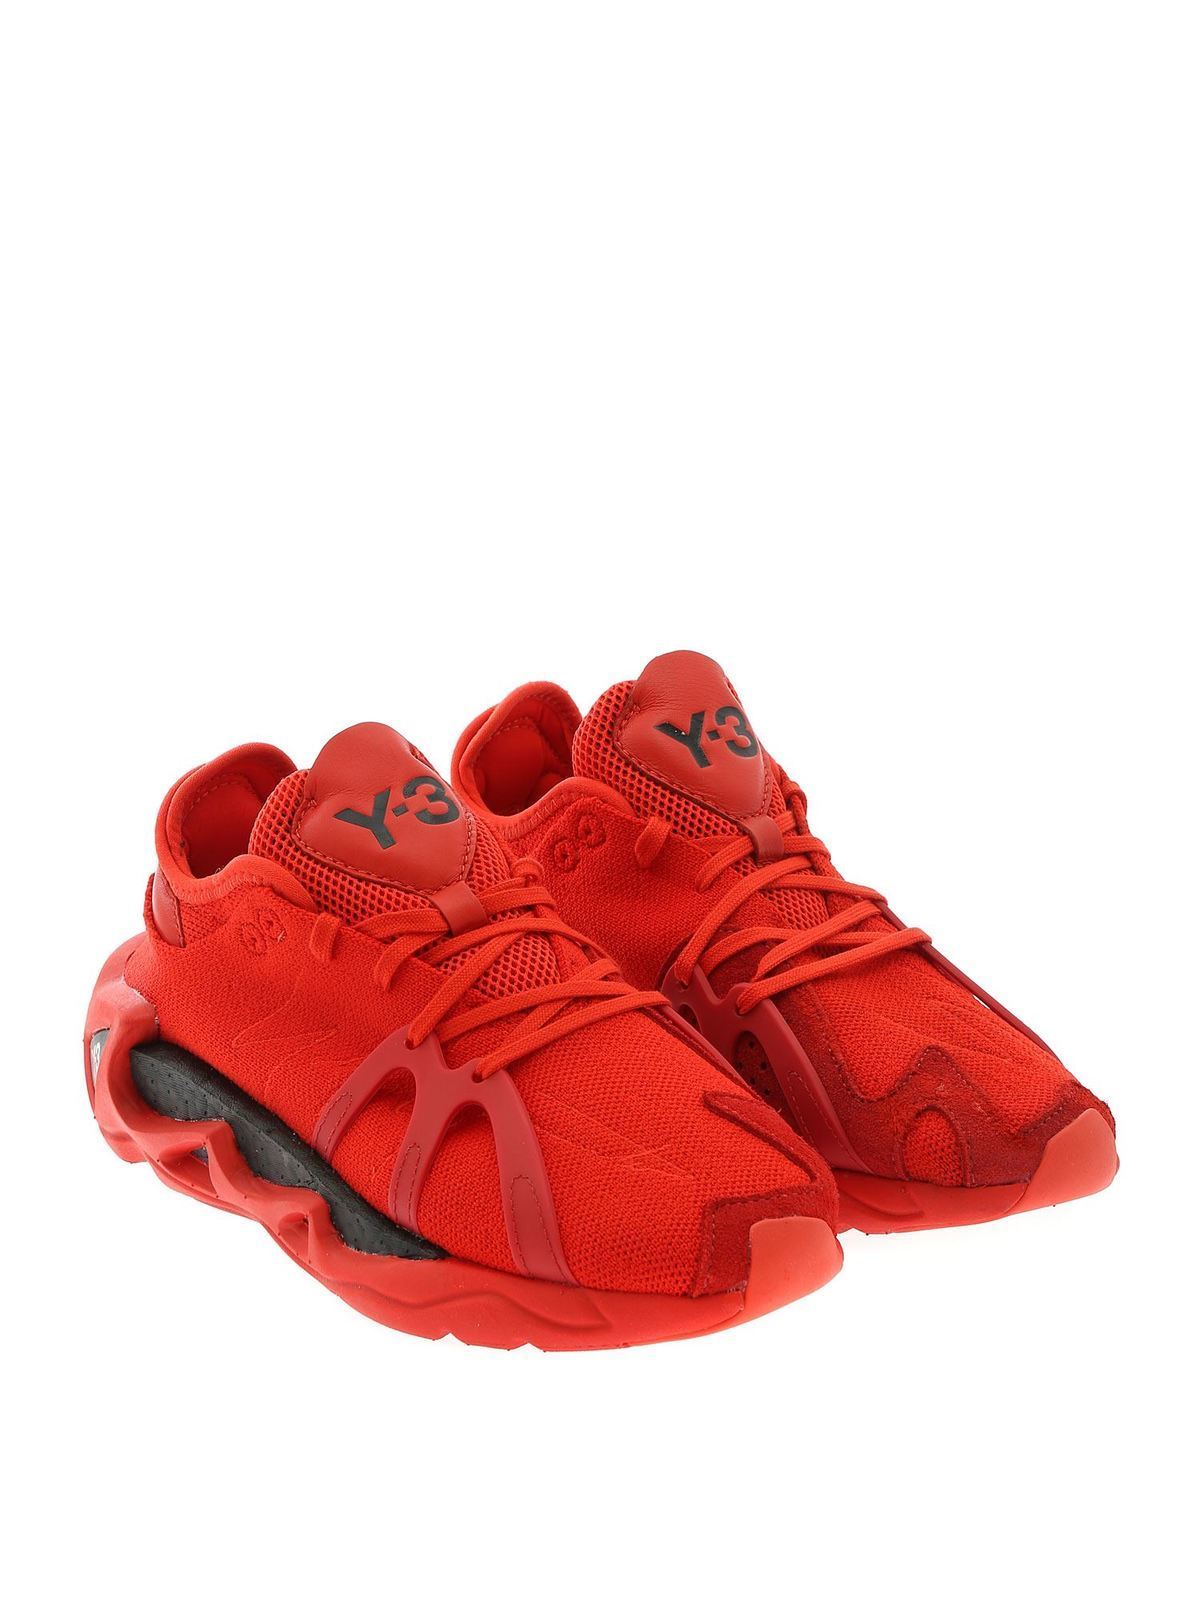 Trainers Y3 By Yamamoto - S-97 sneakers in red - EH1399